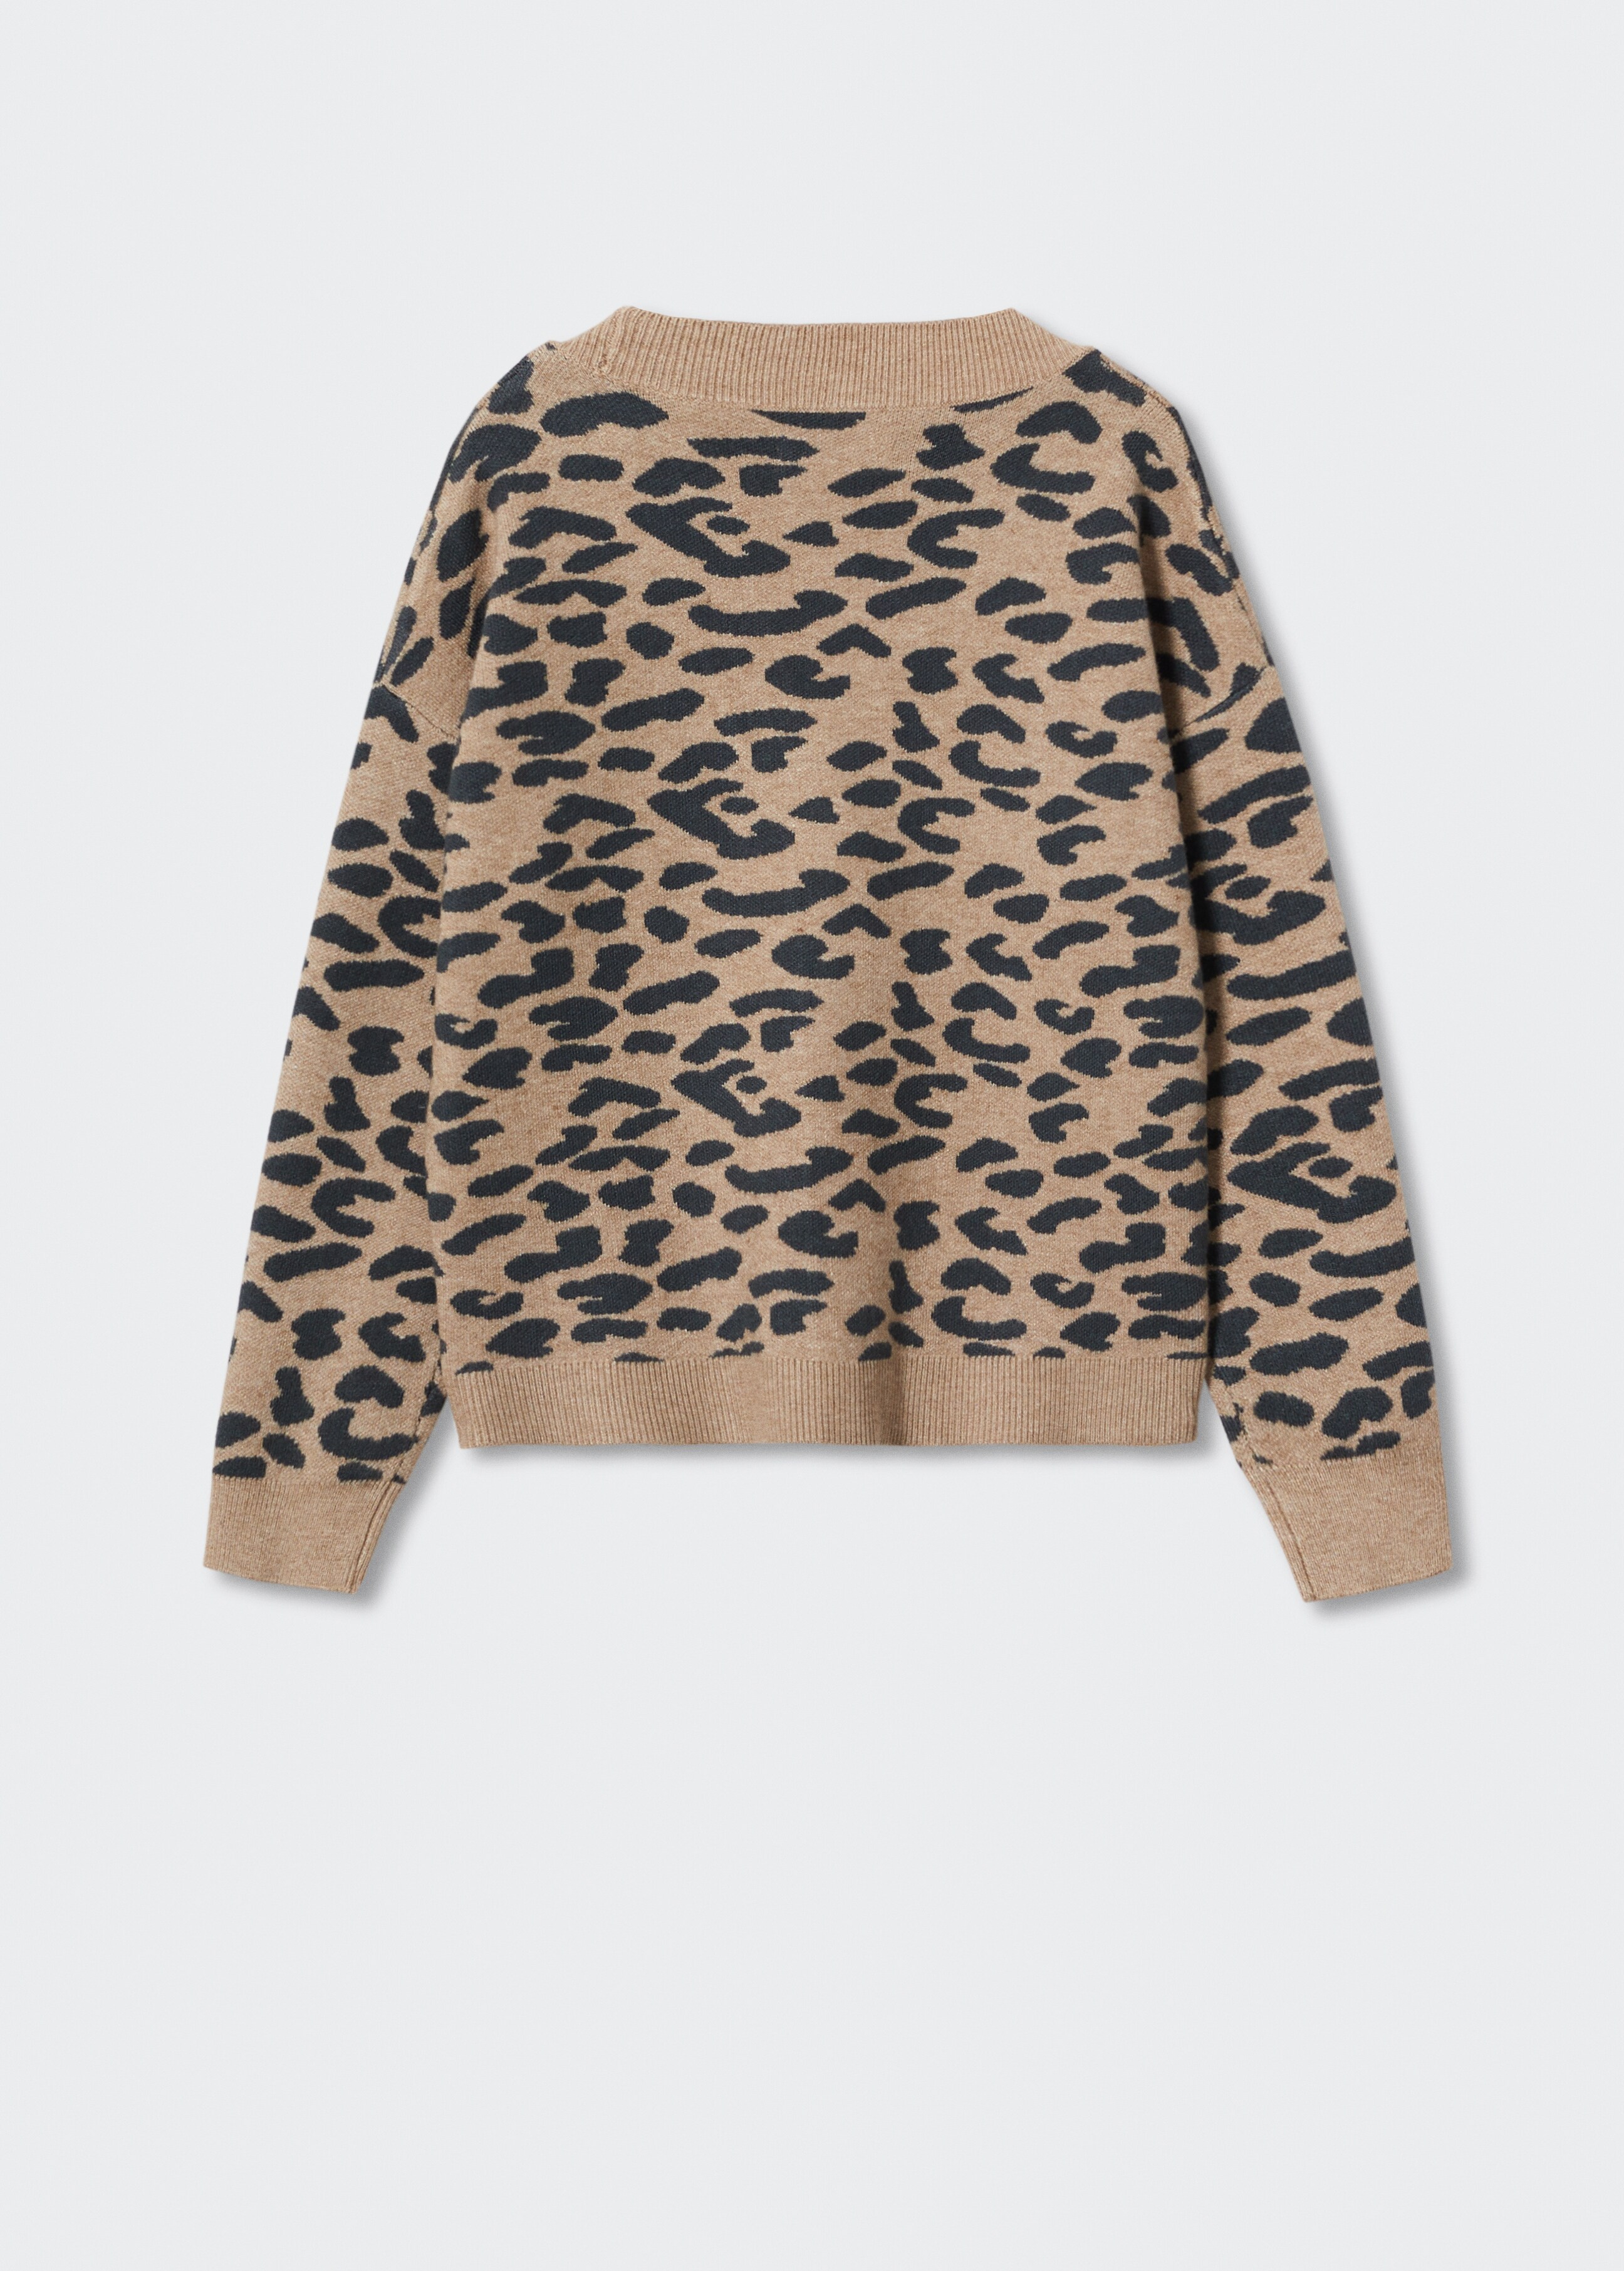 Leopard print cardigan - Reverse of the article